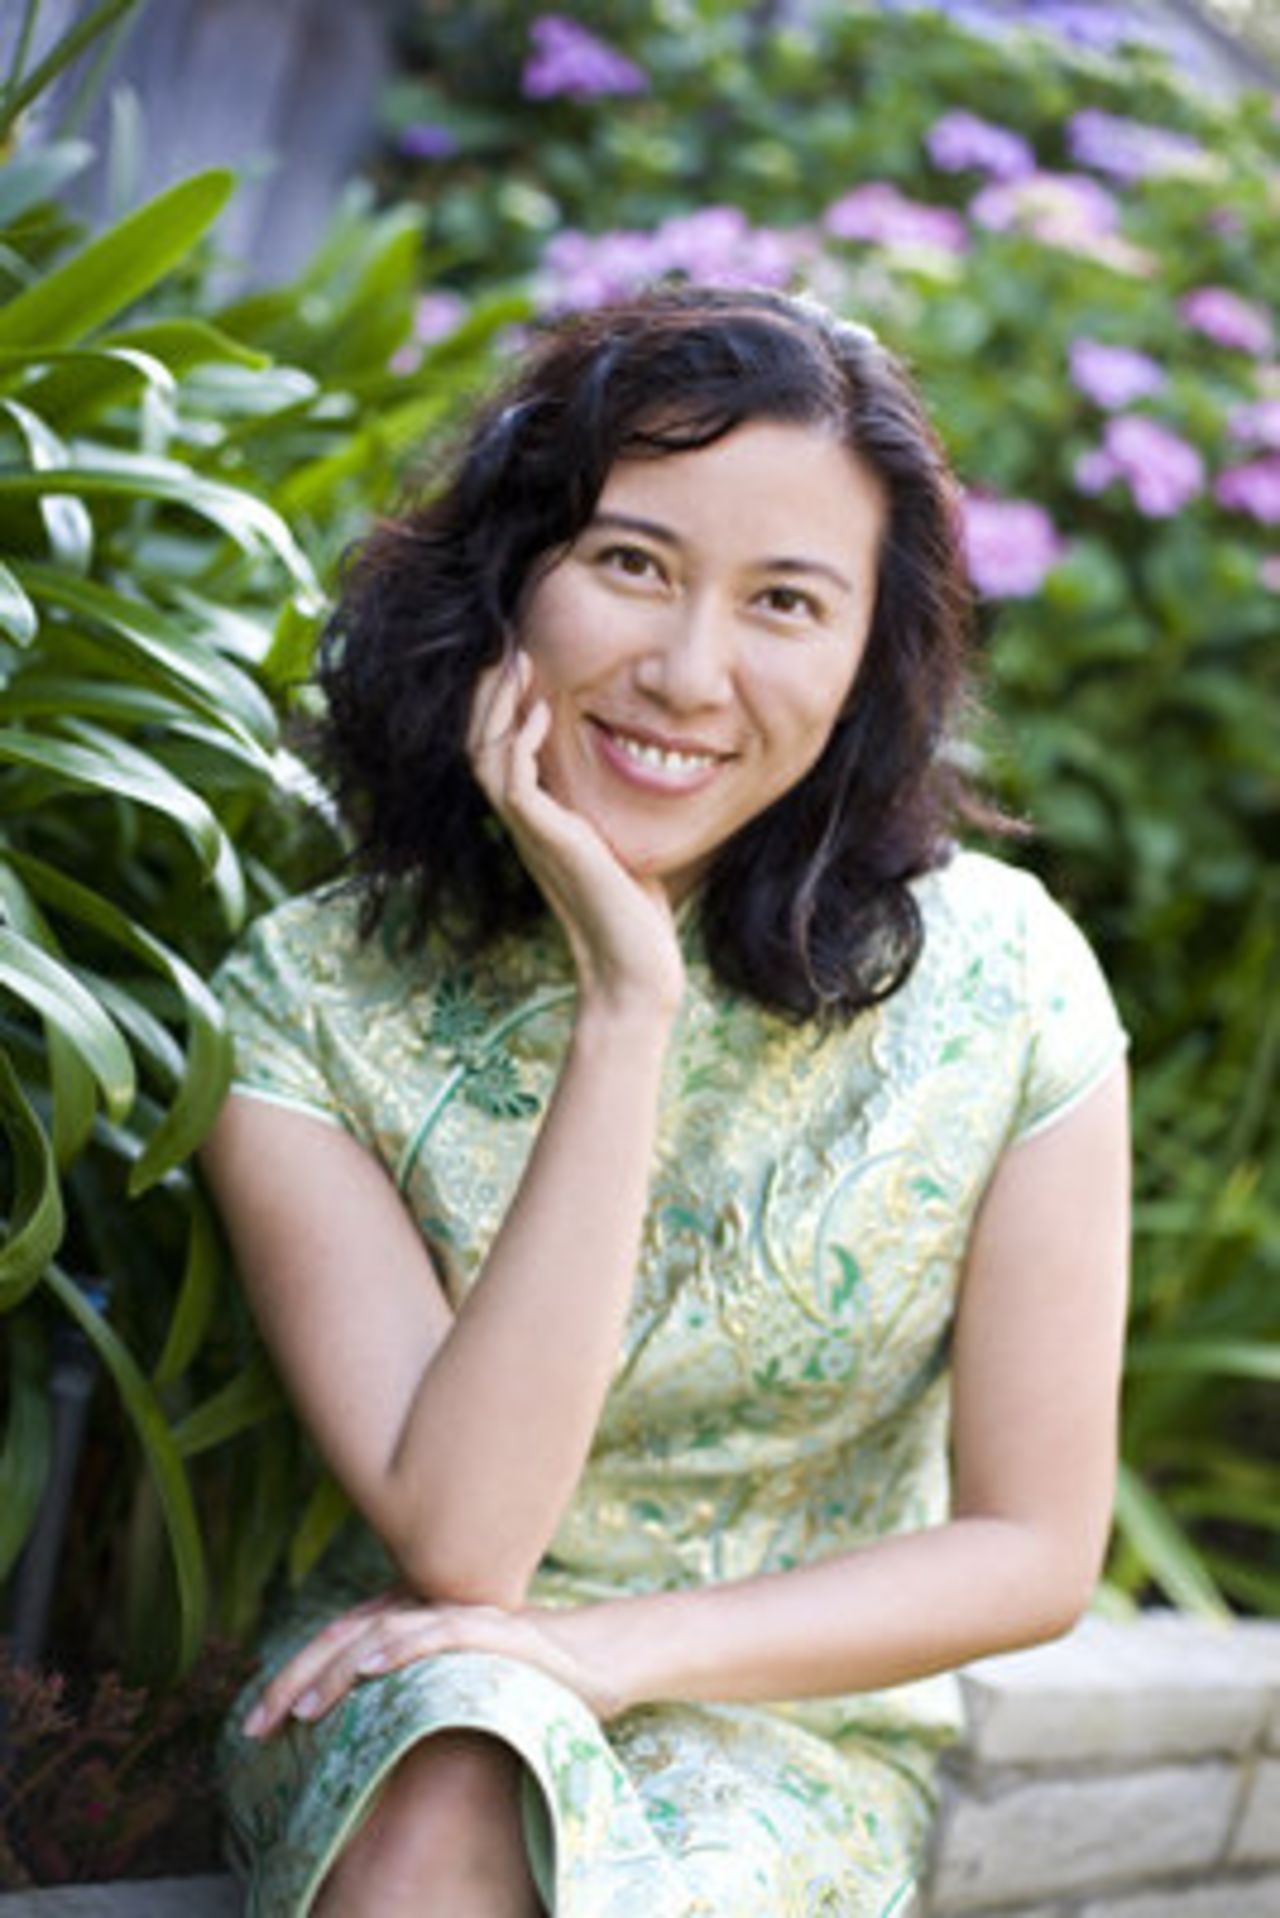 "I would like to have more people of color authors published, and more characters of color in young adult lit that are main characters," said <a href="http://cindypon.com/" target="_blank" target="_blank">Cindy Pon</a>, co-founder of <a href="http://diversityinya.tumblr.com/" target="_blank" target="_blank">Diversity in YA</a>. "That also gets them on the cover." 